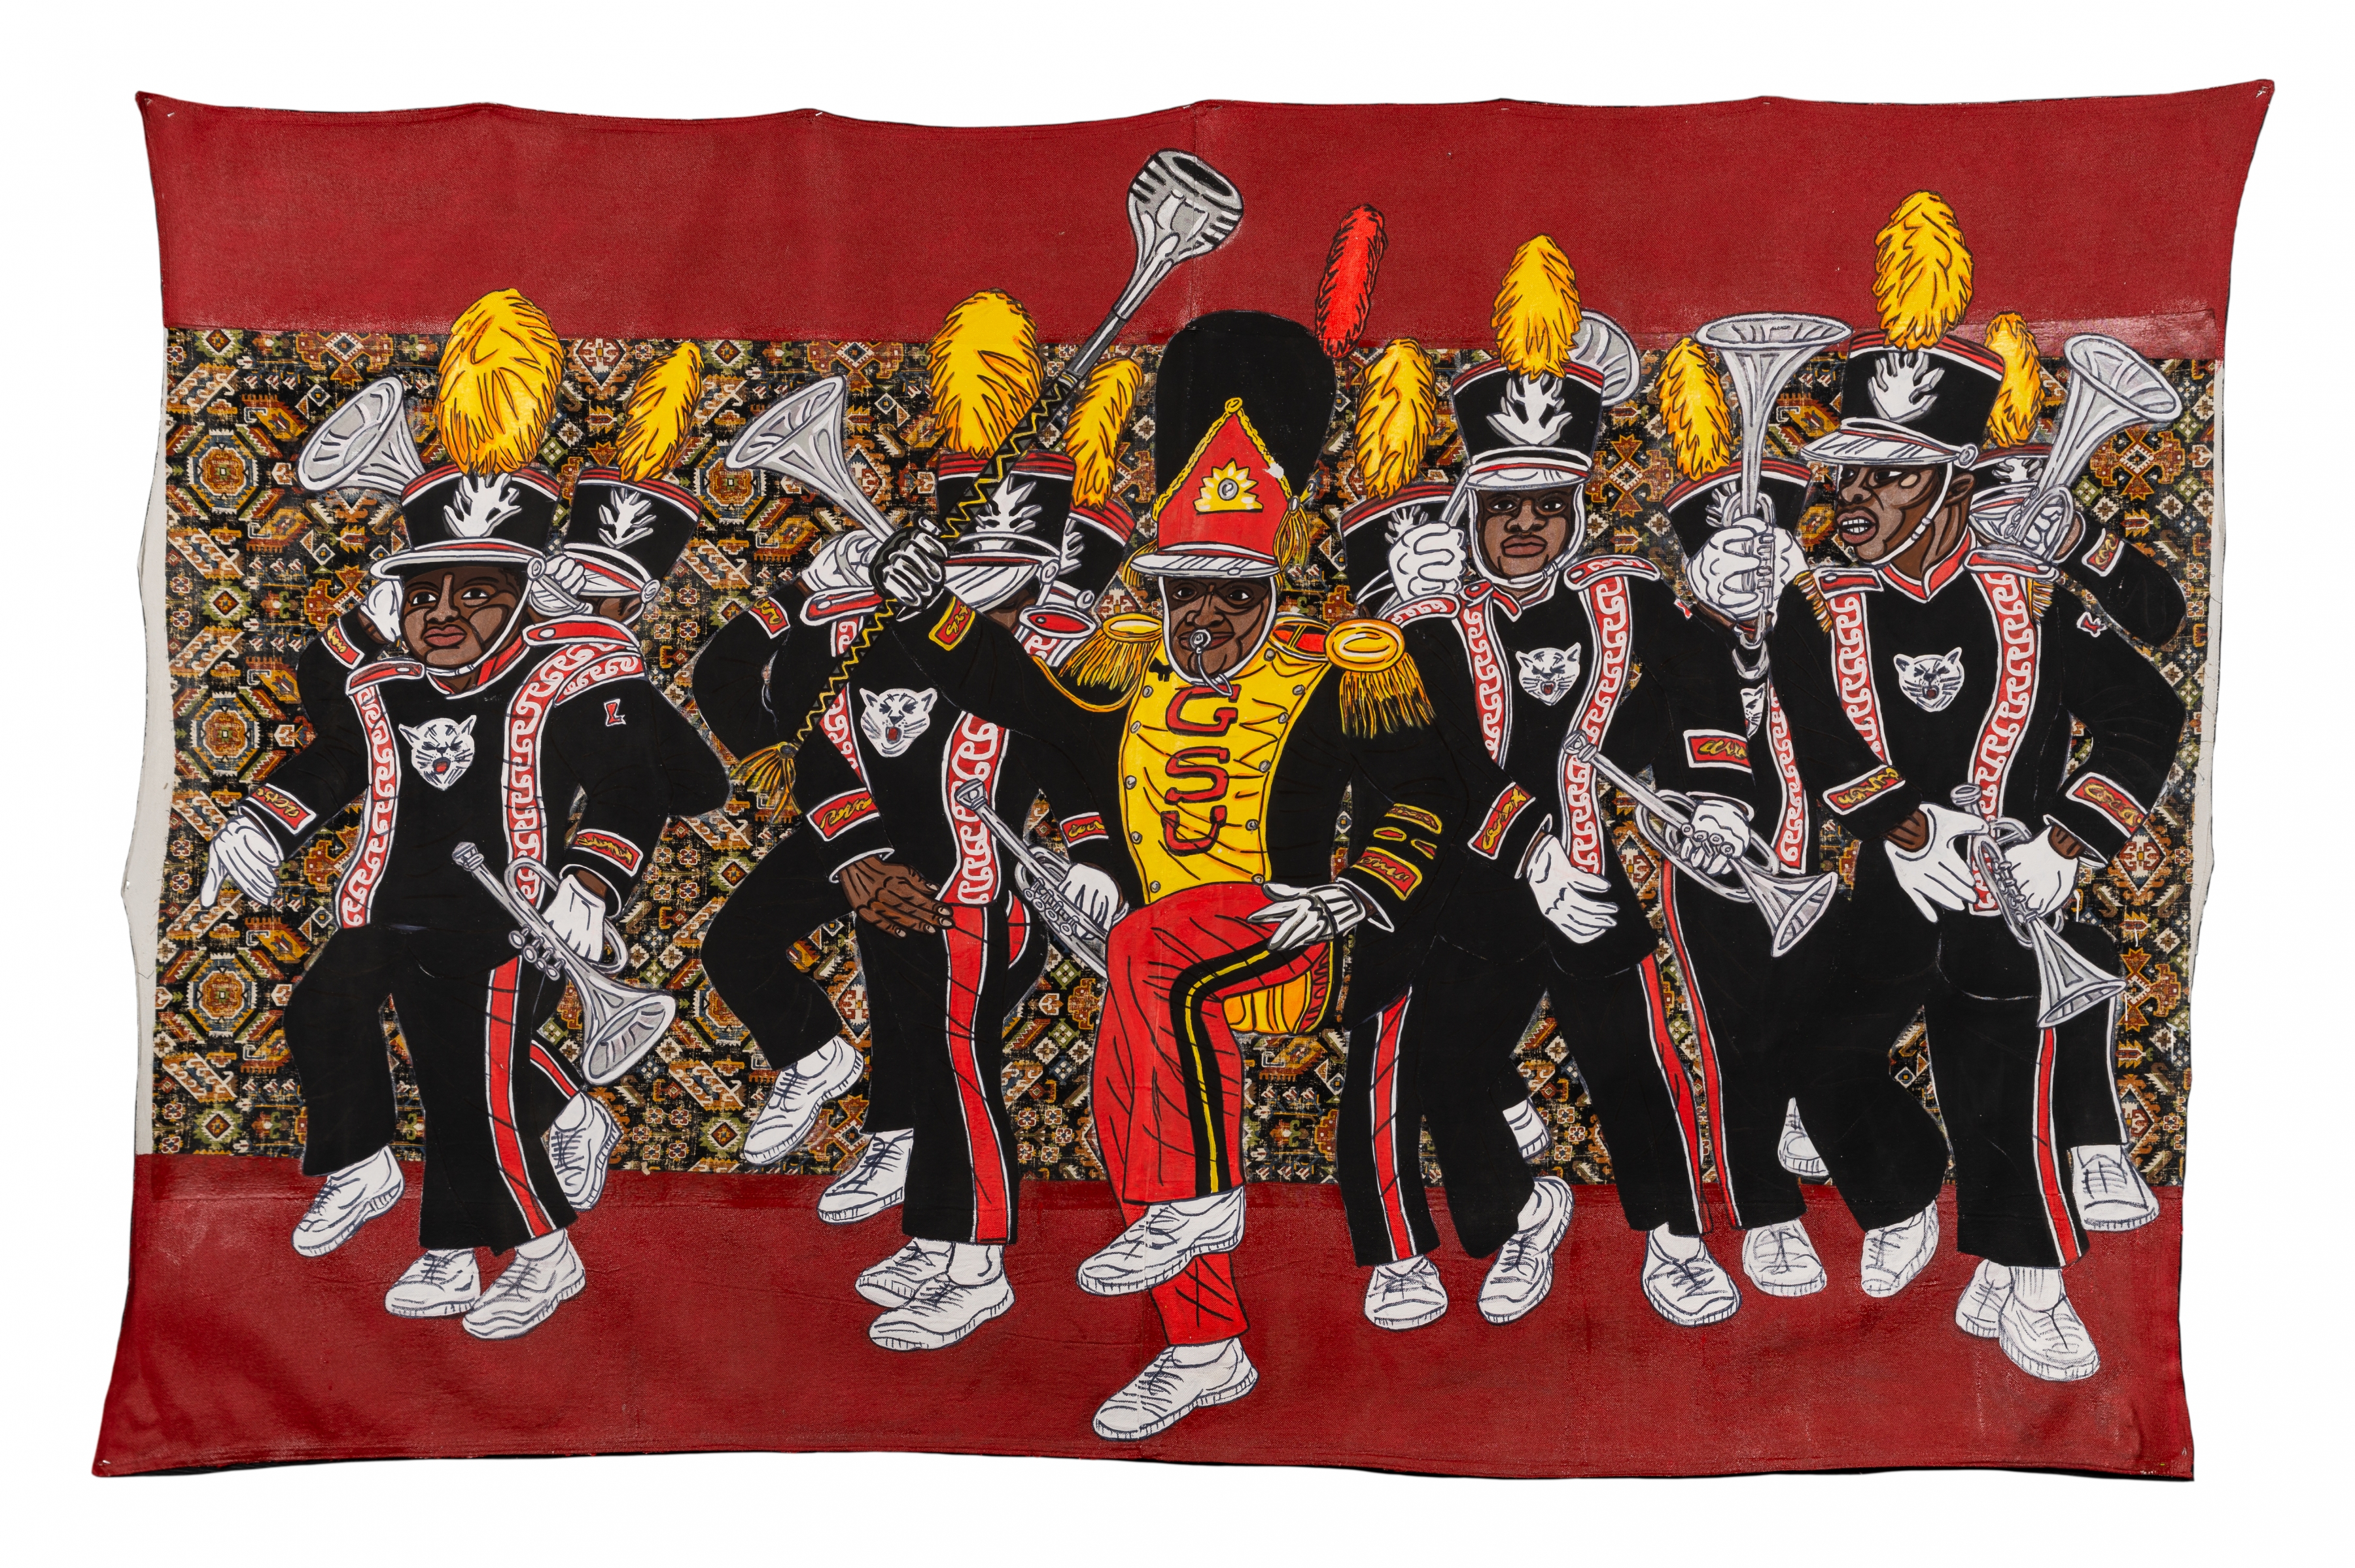 Keith Duncan, Grambling State University Marching Band, 2020
74 x 108 inches